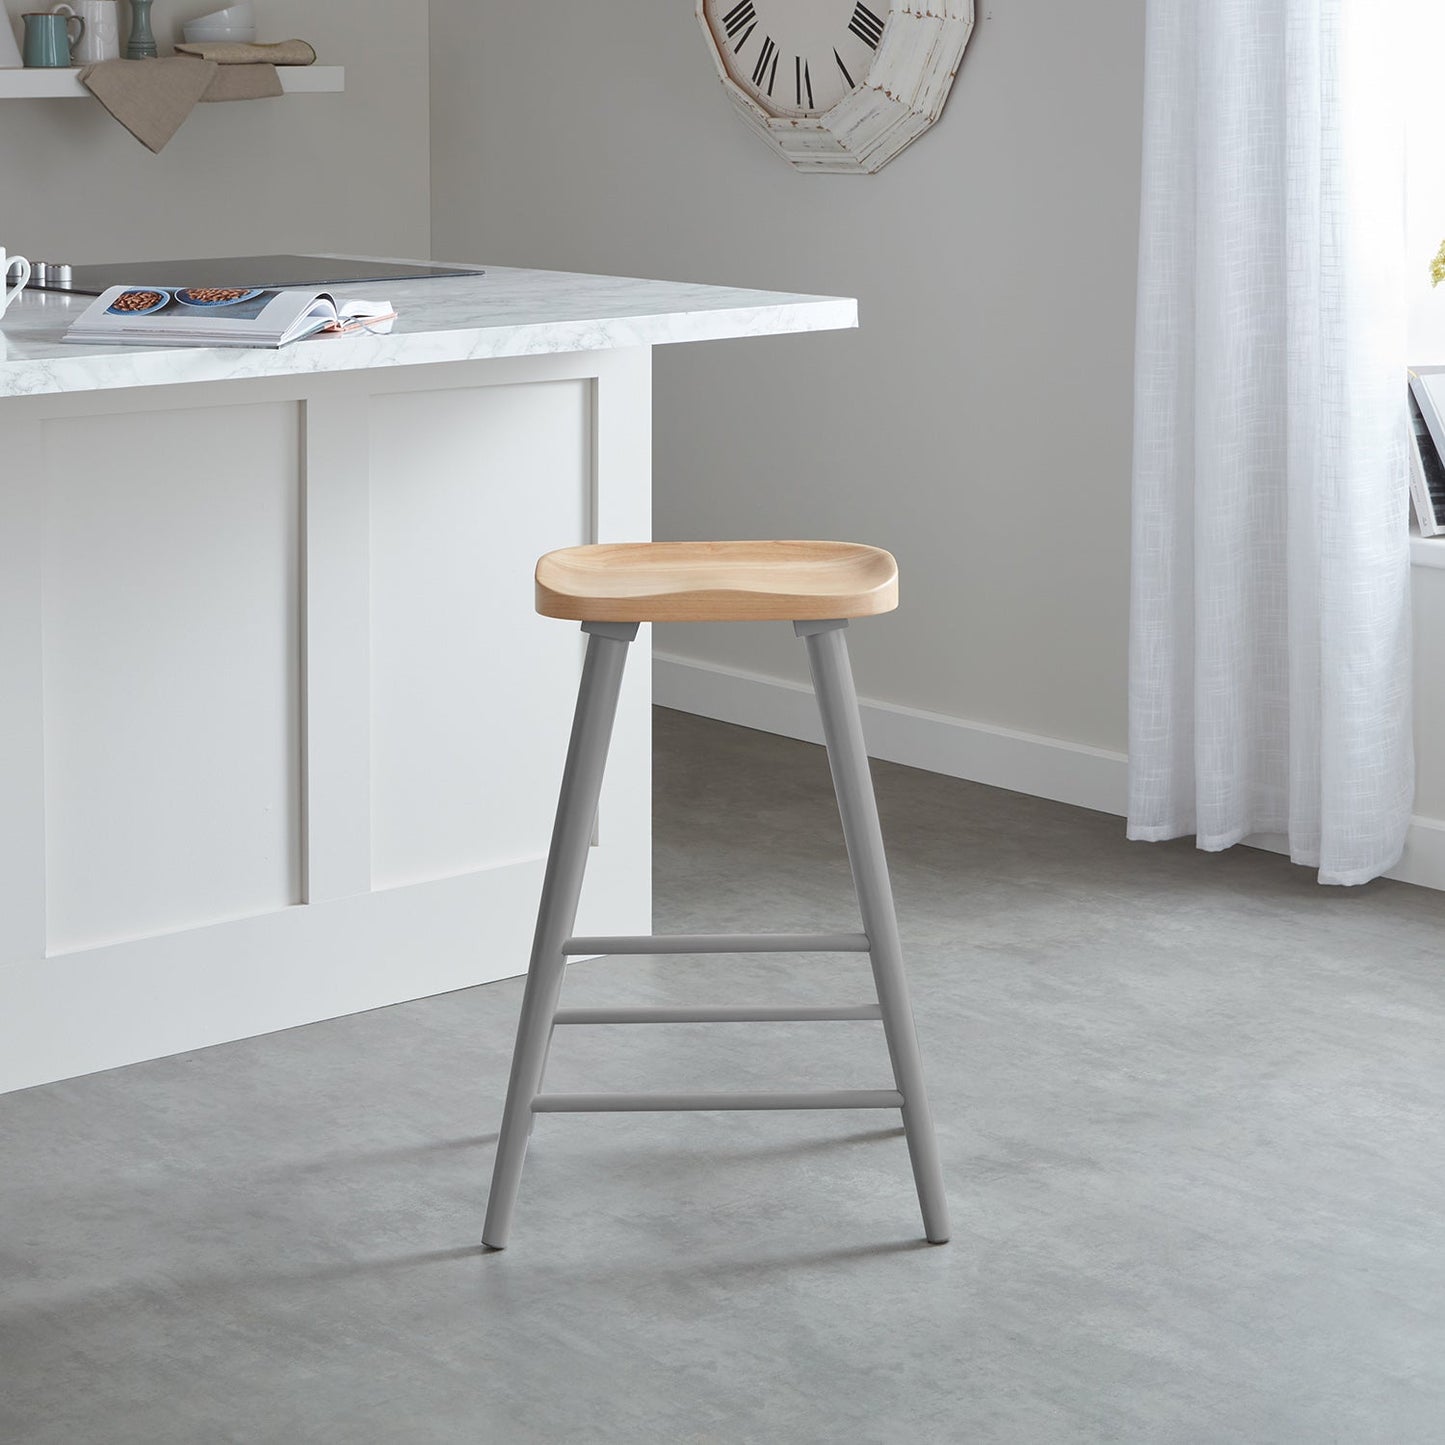 Silvester bar stool - grey frame with natural top - Laura James